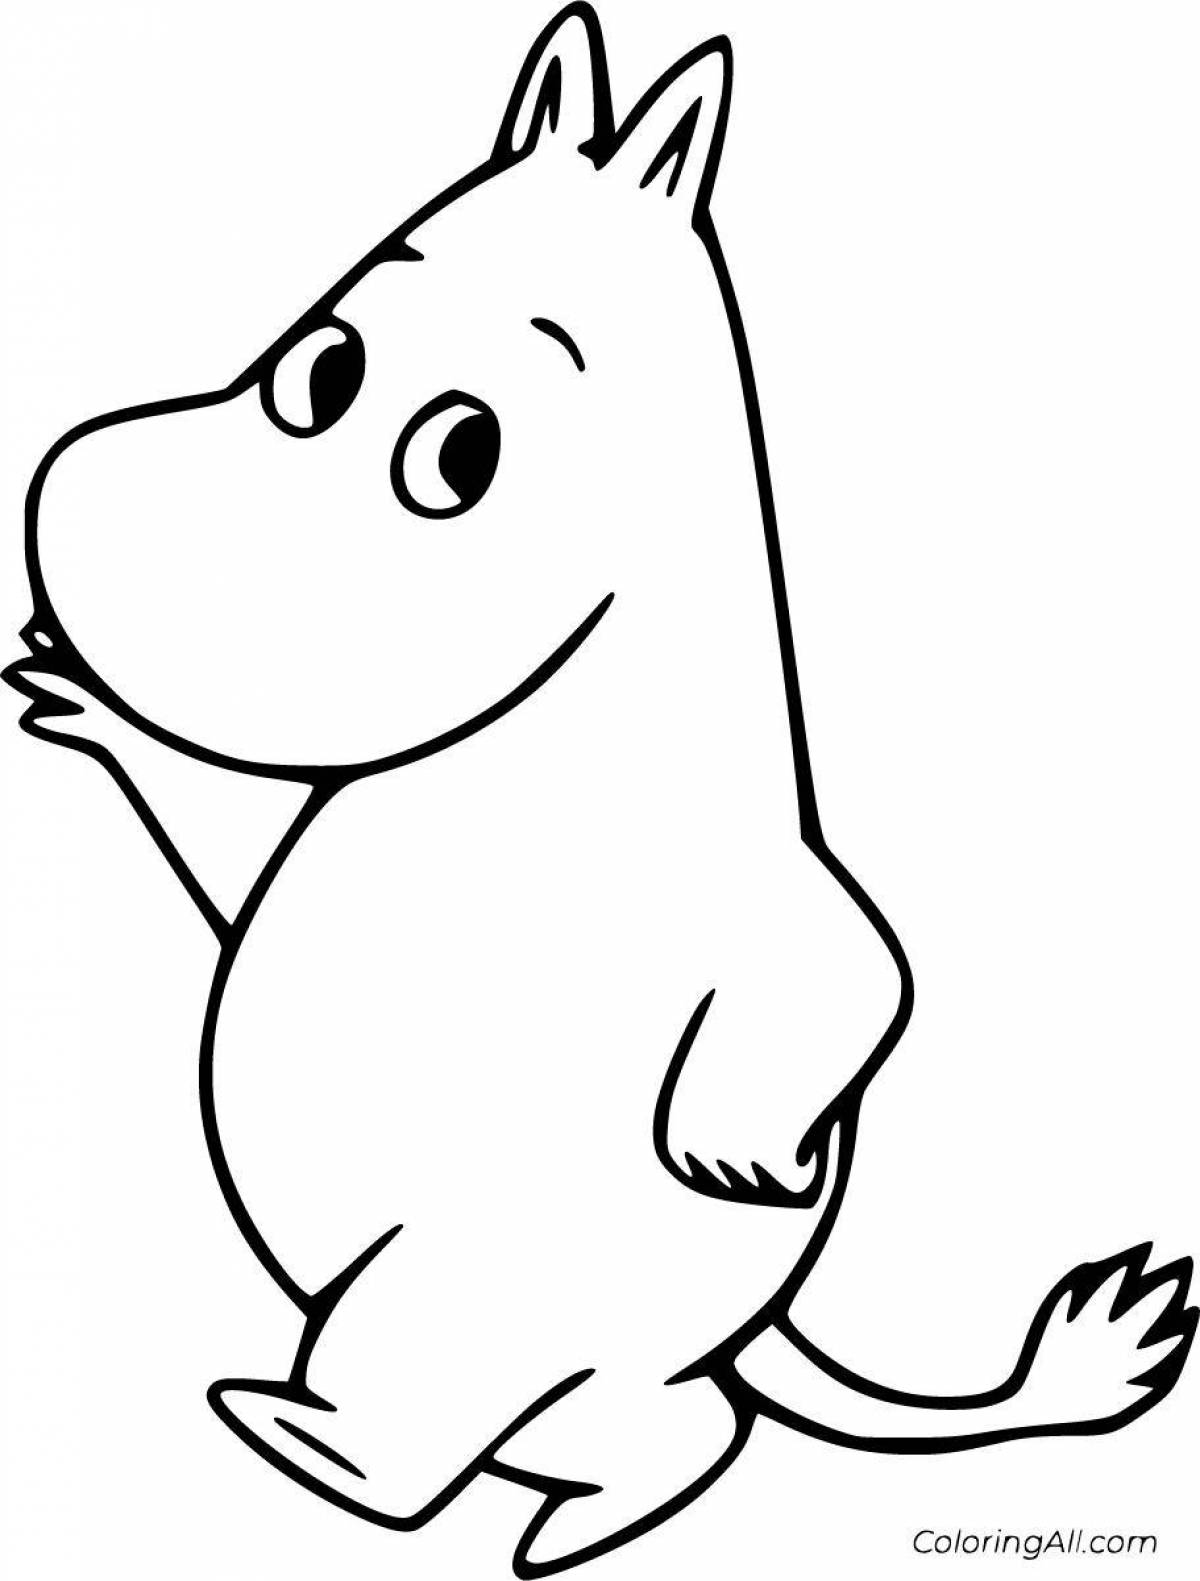 Coloring page Moomintroll with colored splashes